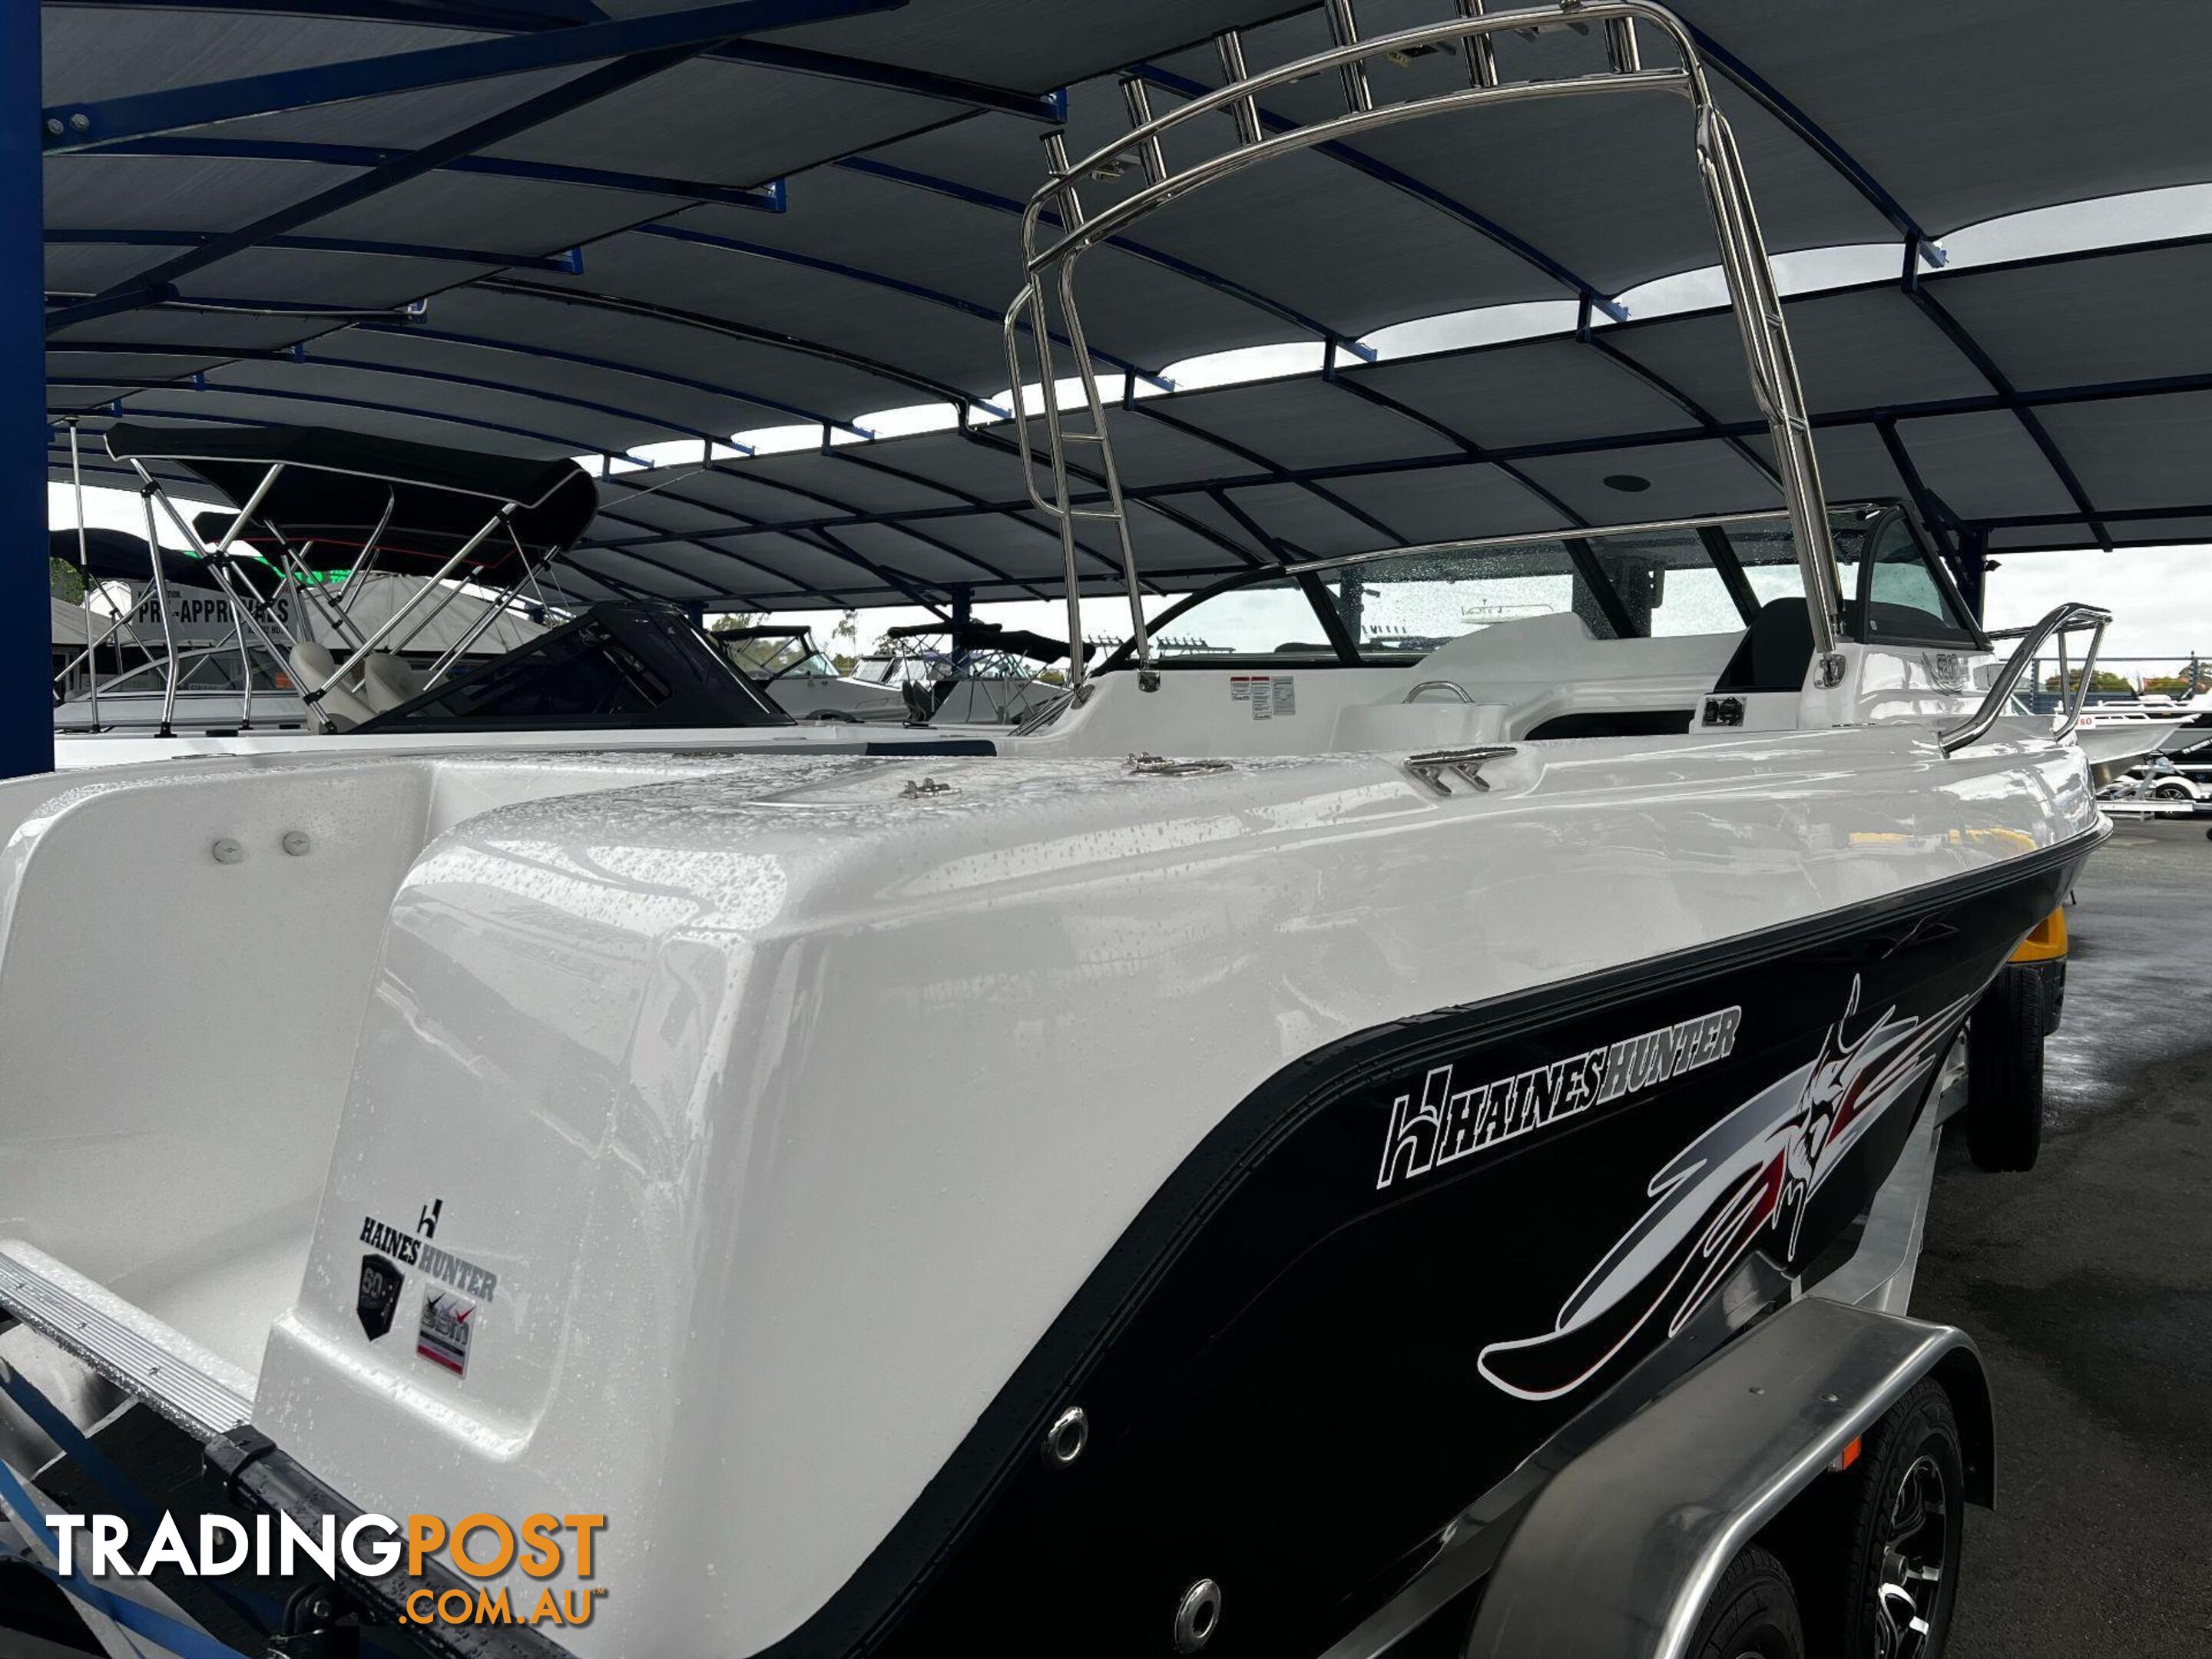 Haines Hunter 620R + Yamaha F200hp 4-Stroke - IN STOCK NOW!